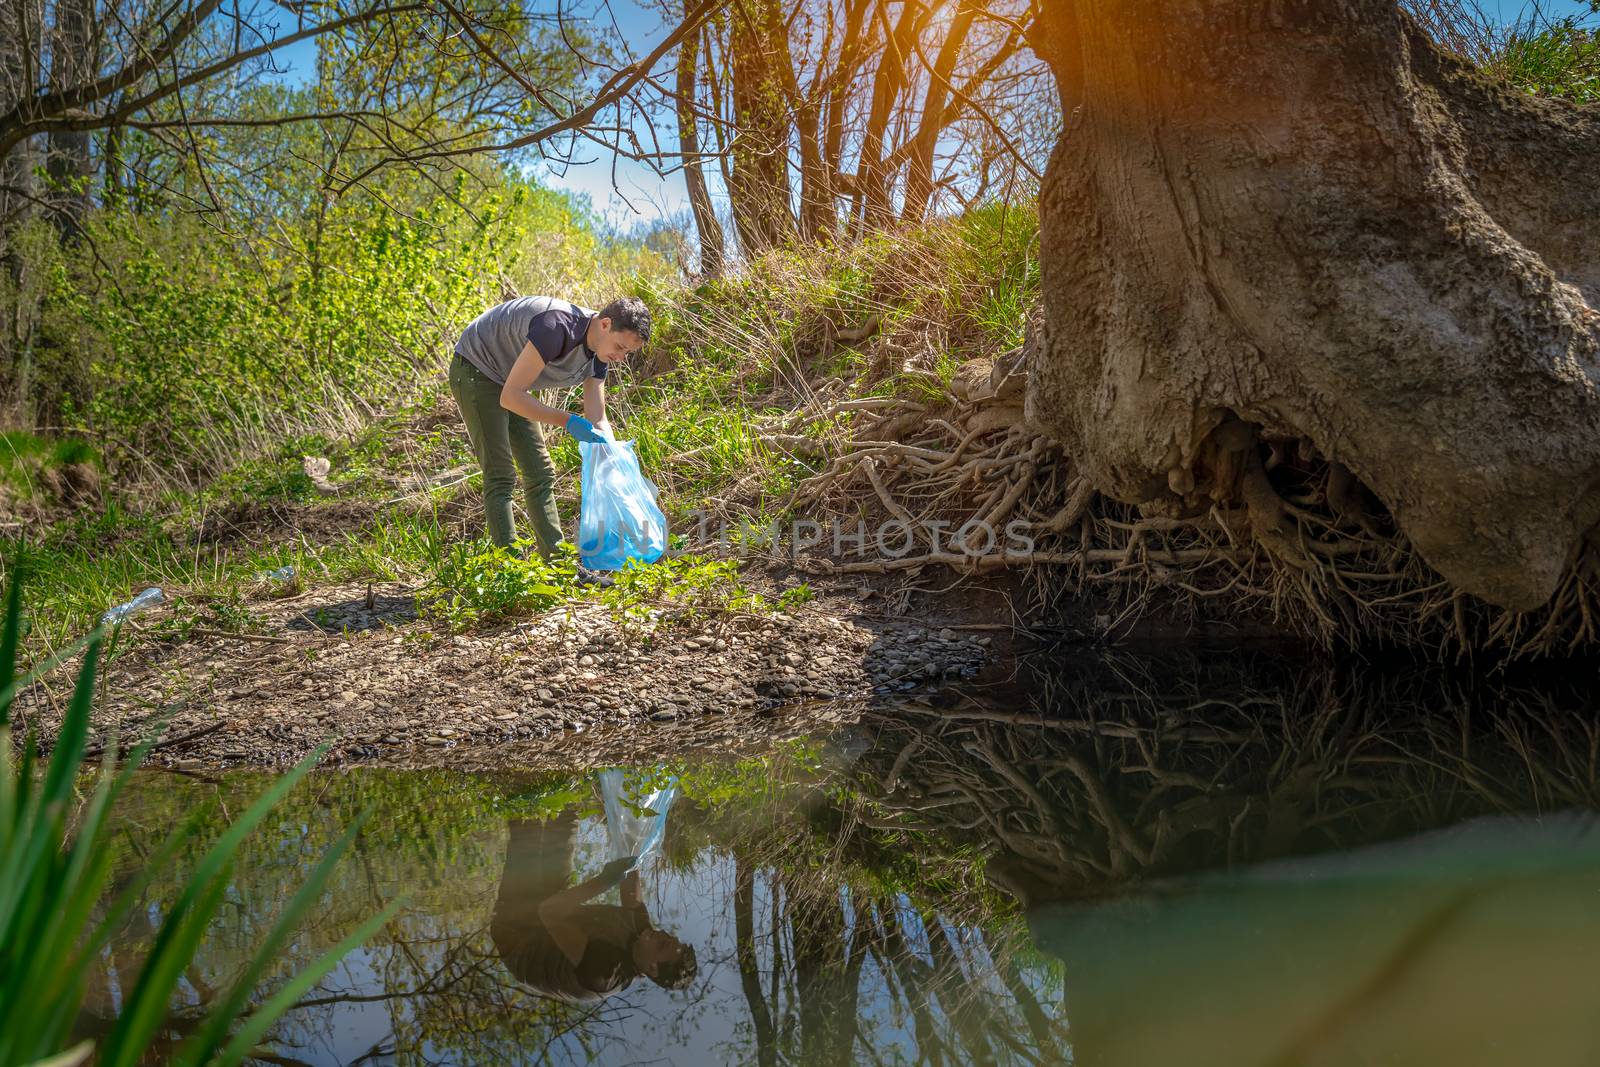 cleaning of forests and parks from garbage, waste collection and sorting, environmental assistance by Edophoto